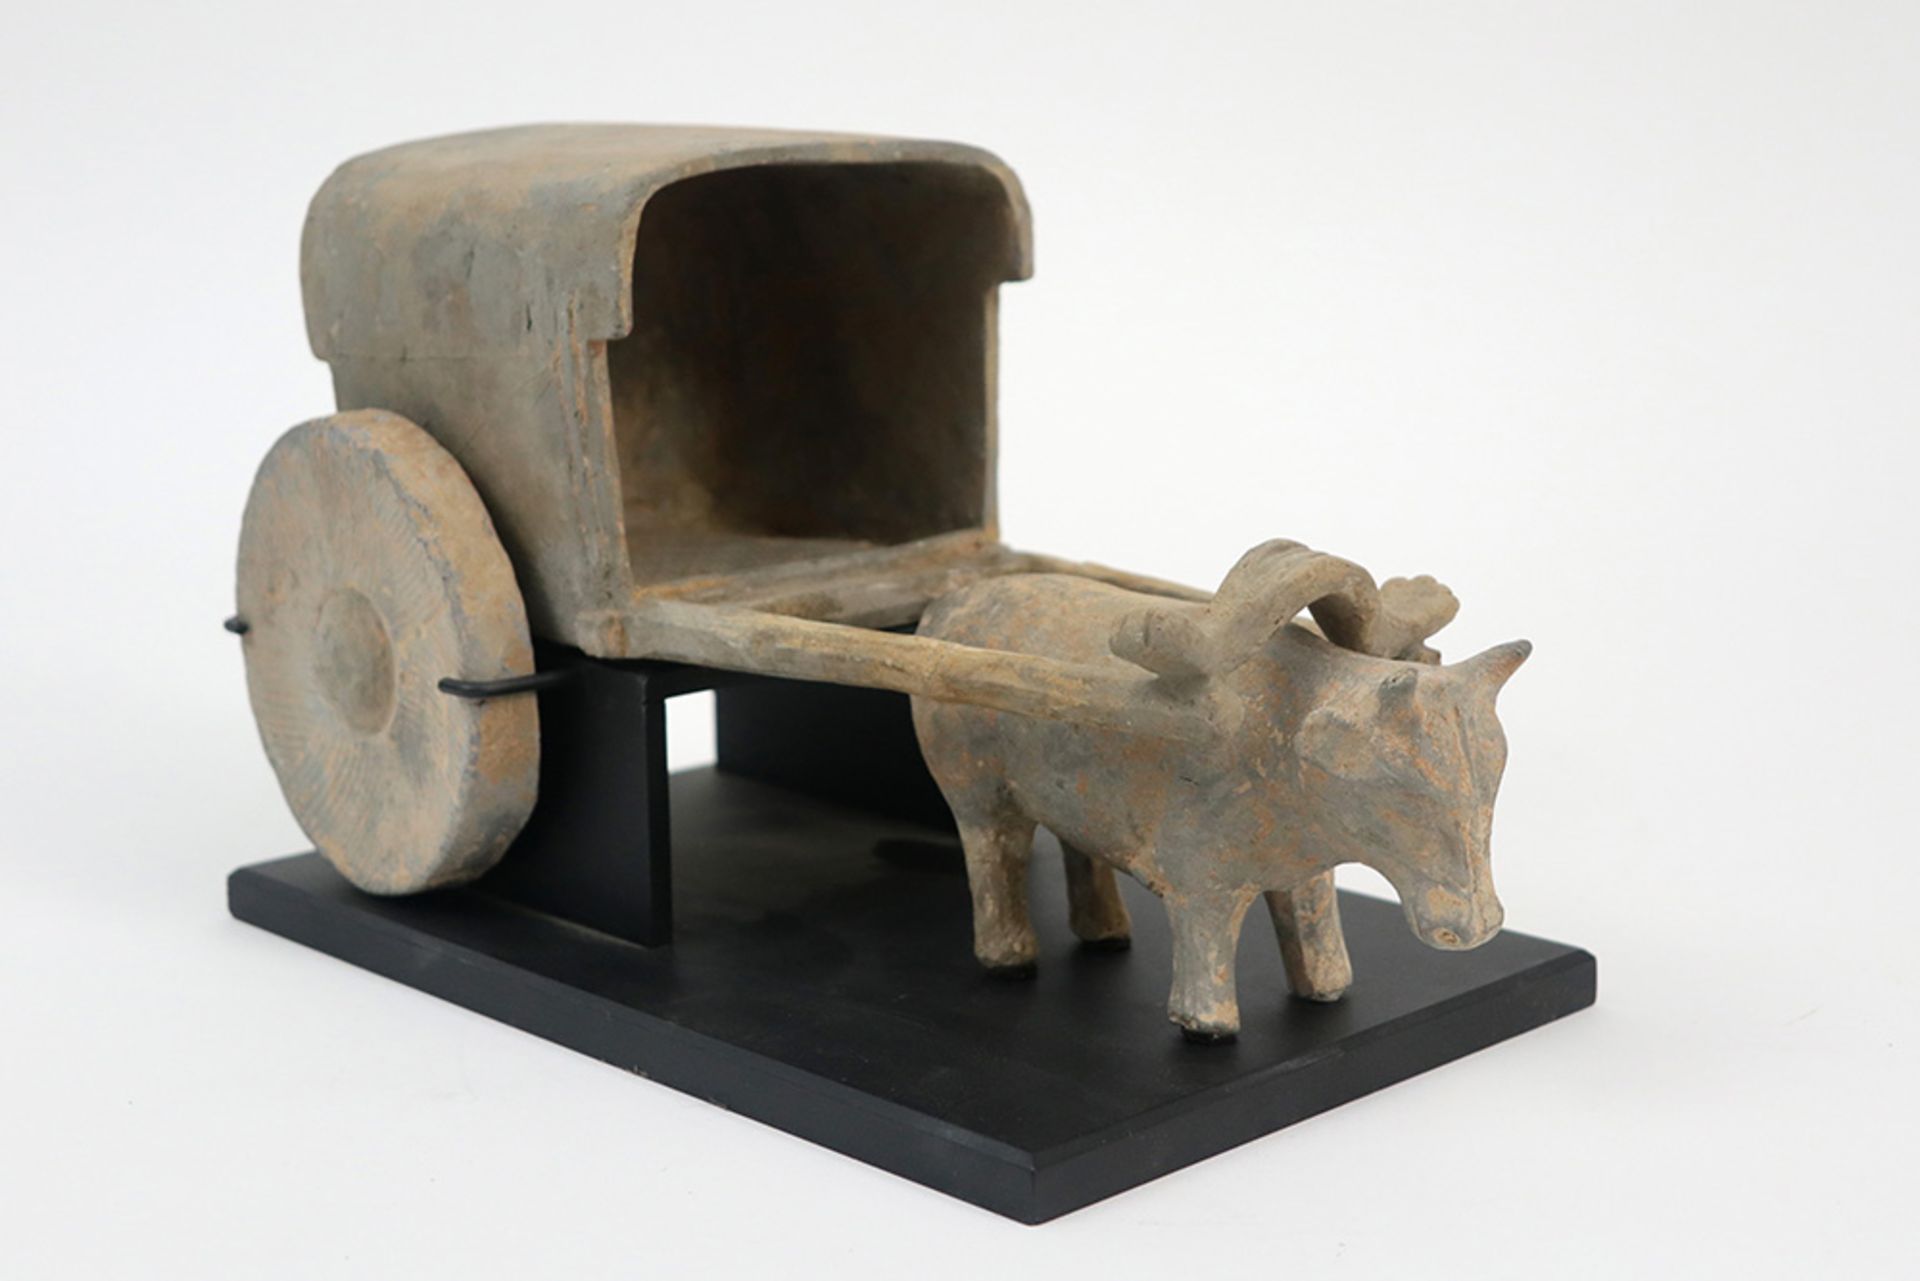 Chinese Han period tomb find : a sculpture in earthenware depicting a carriage with two wheels - Bild 2 aus 6